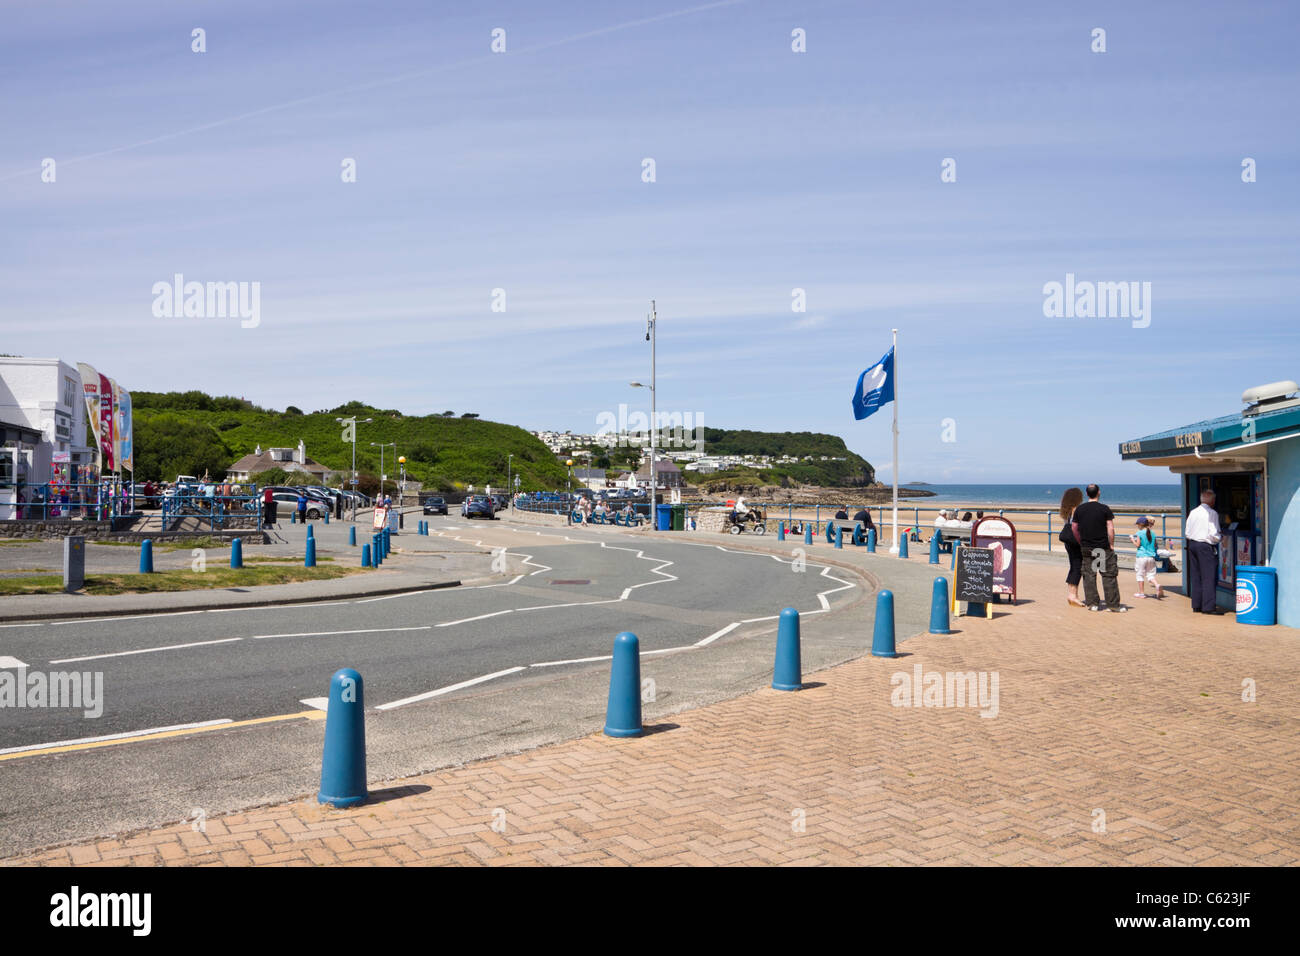 Benllech, Isle of Anglesey (Ynys Mon), North Wales, UK. Seafront of Welsh seaside resort Stock Photo